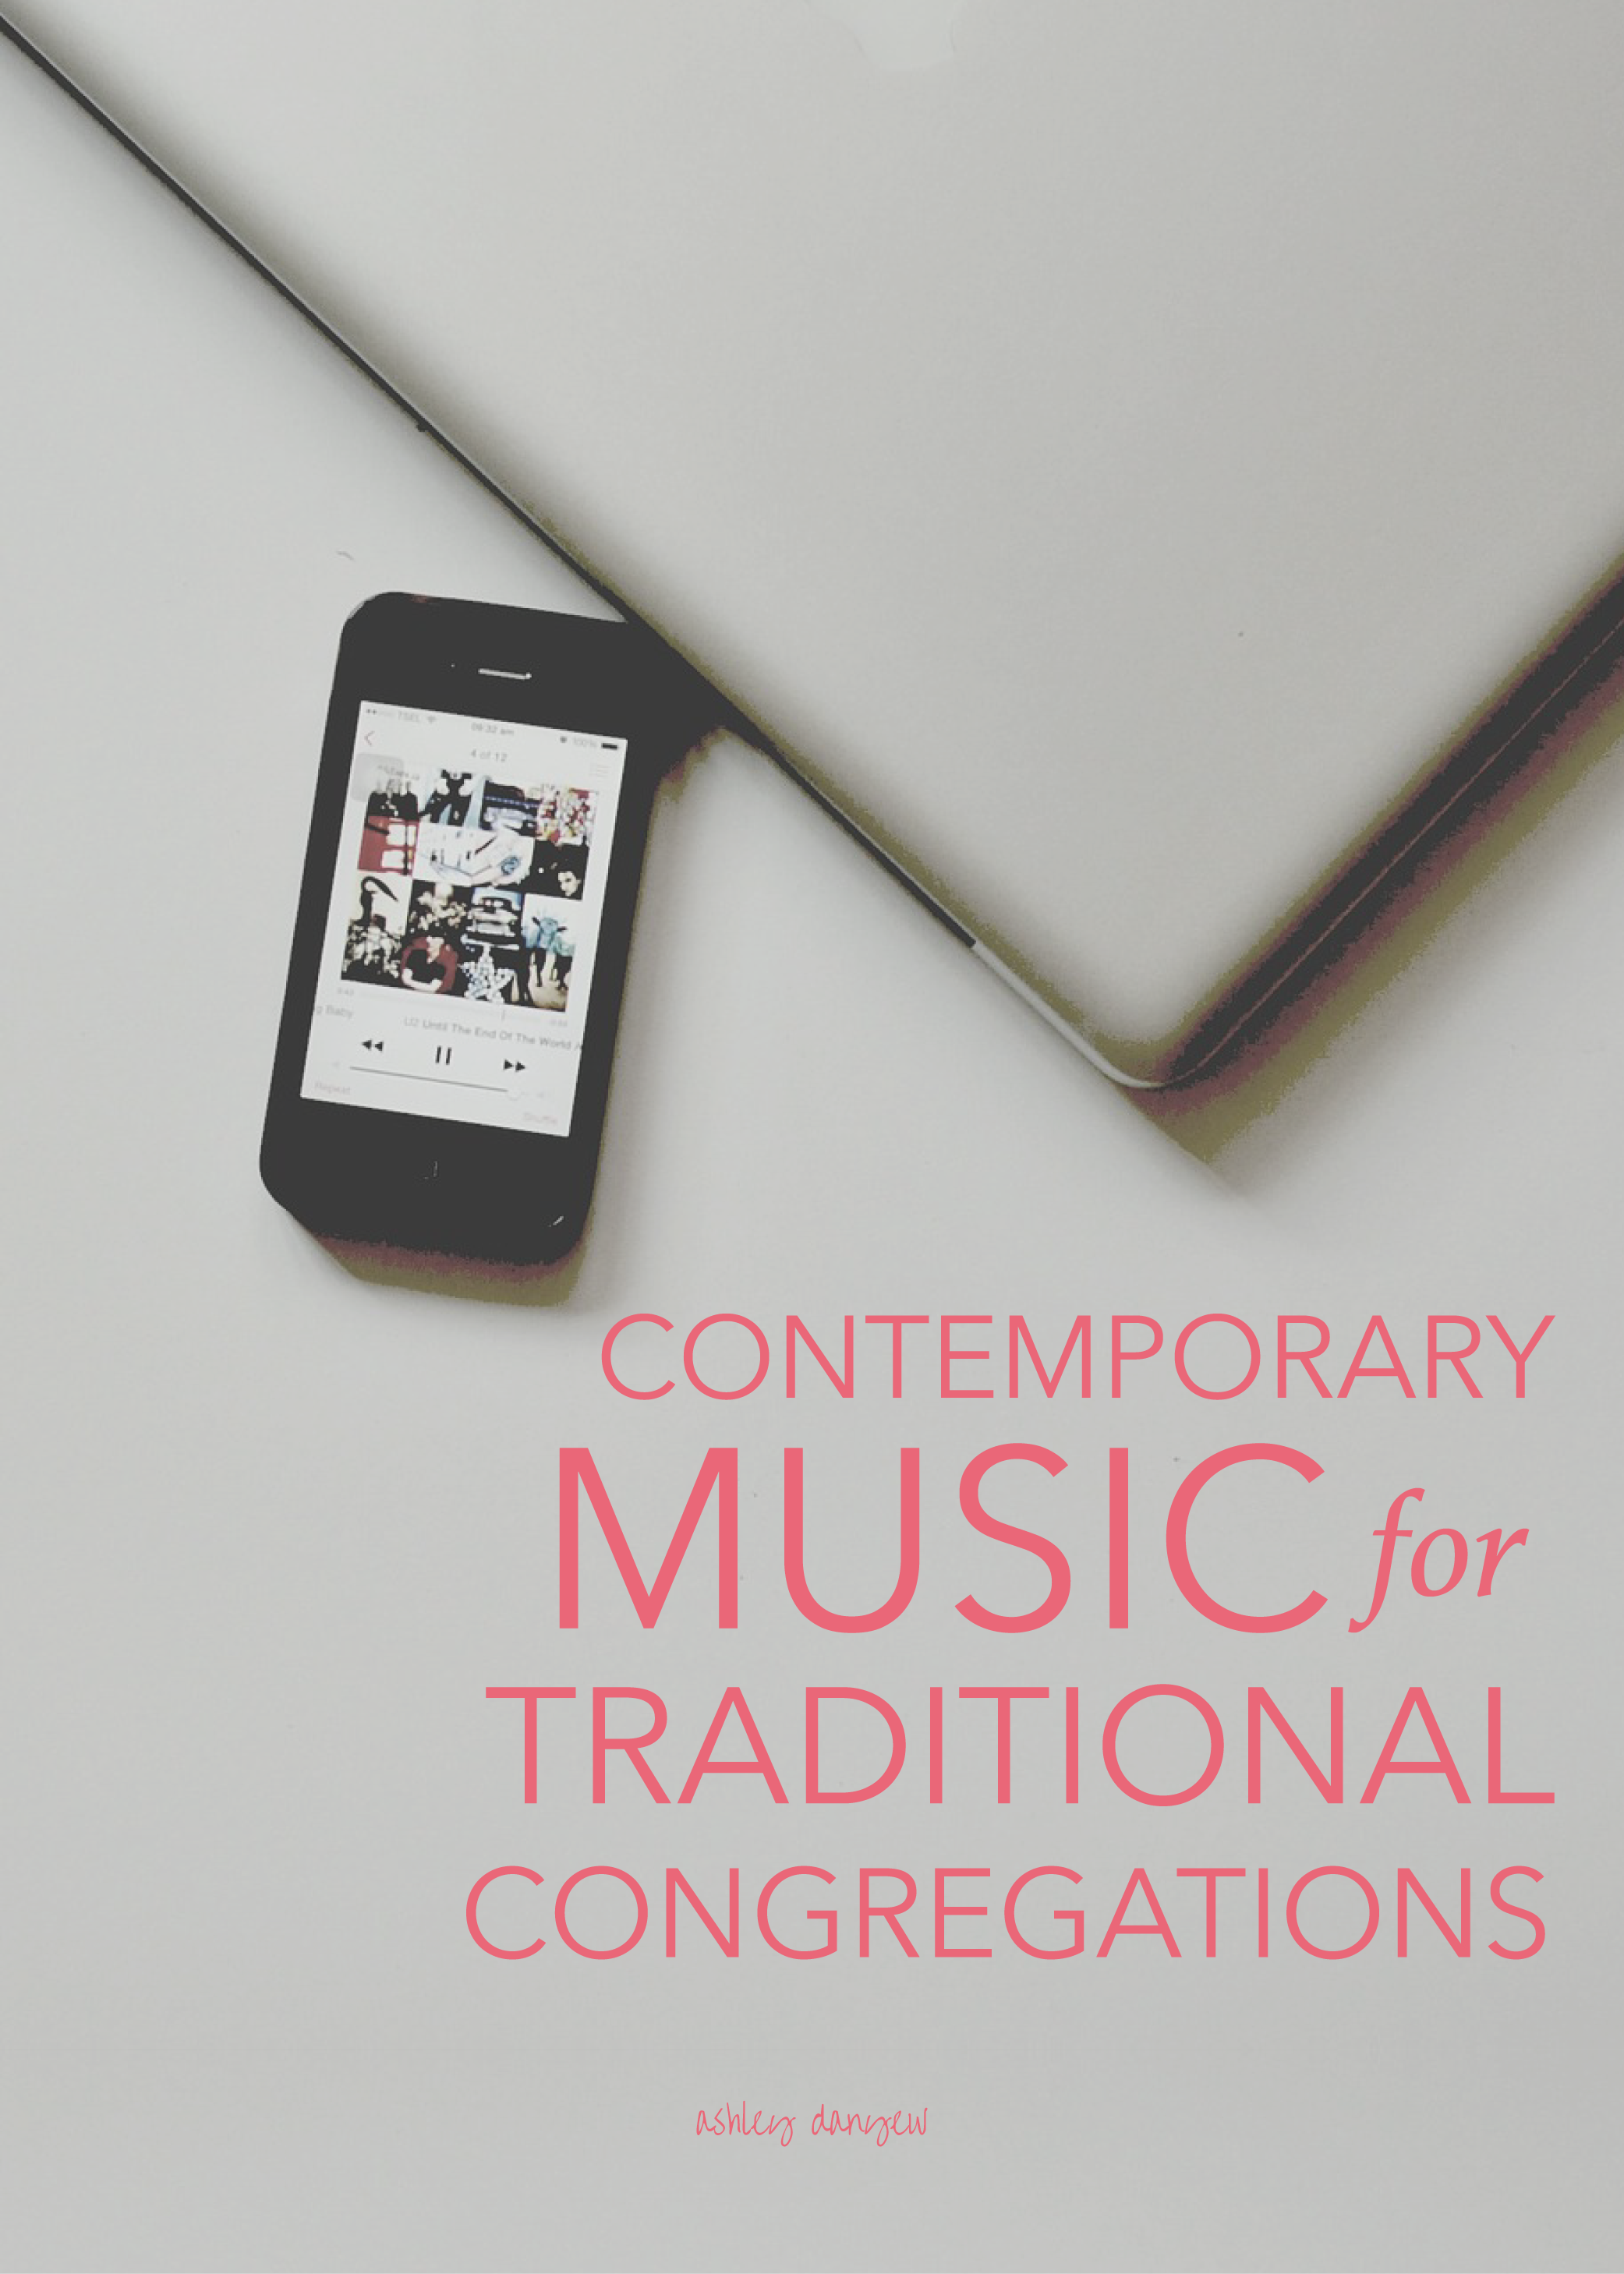 Copy of Contemporary Music for Traditional Congregations